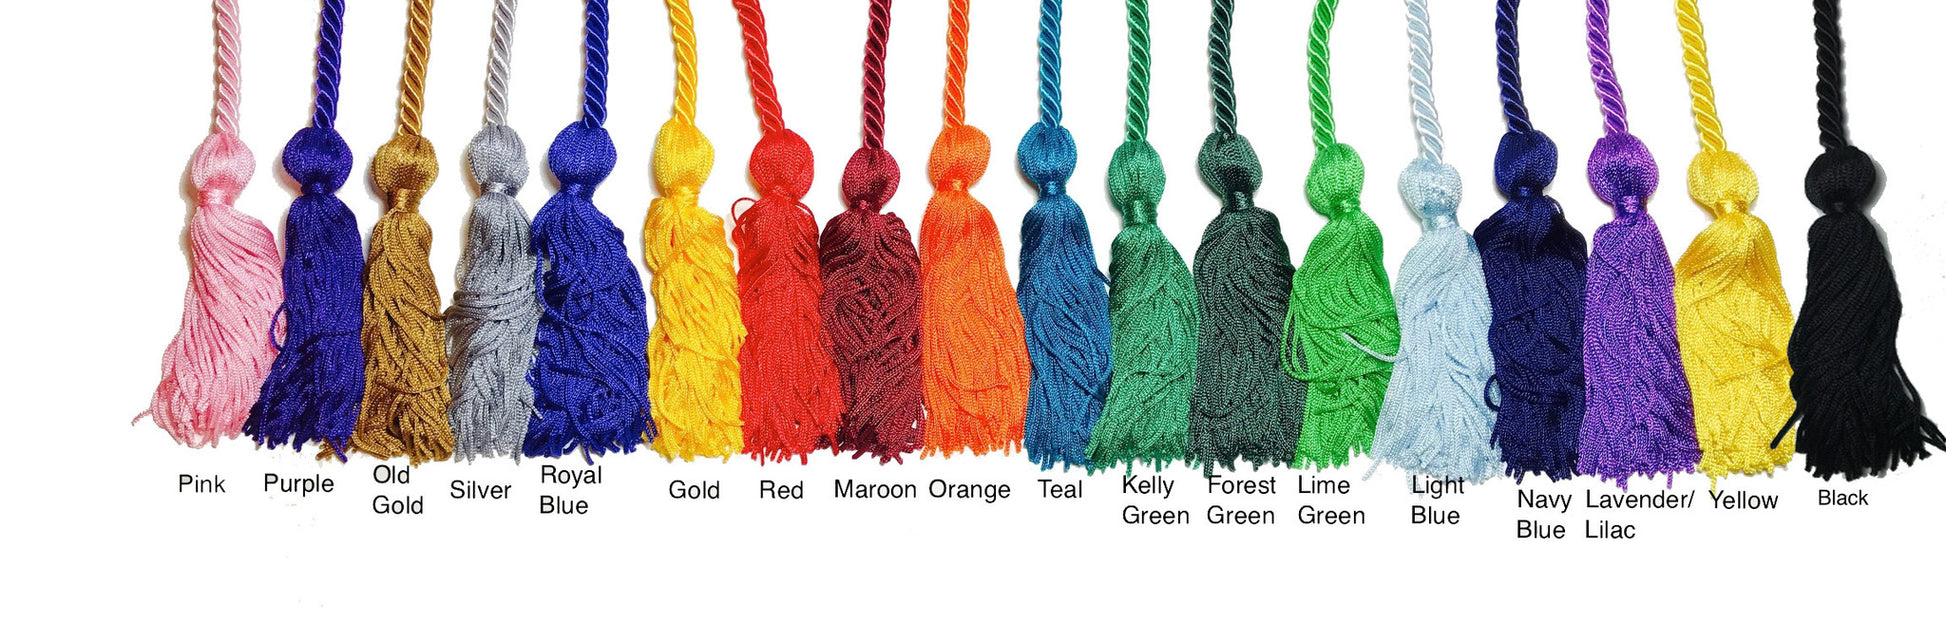 Double Graduation Honor Cords (100+ Color Combinations Available) - Honor Cord Source 